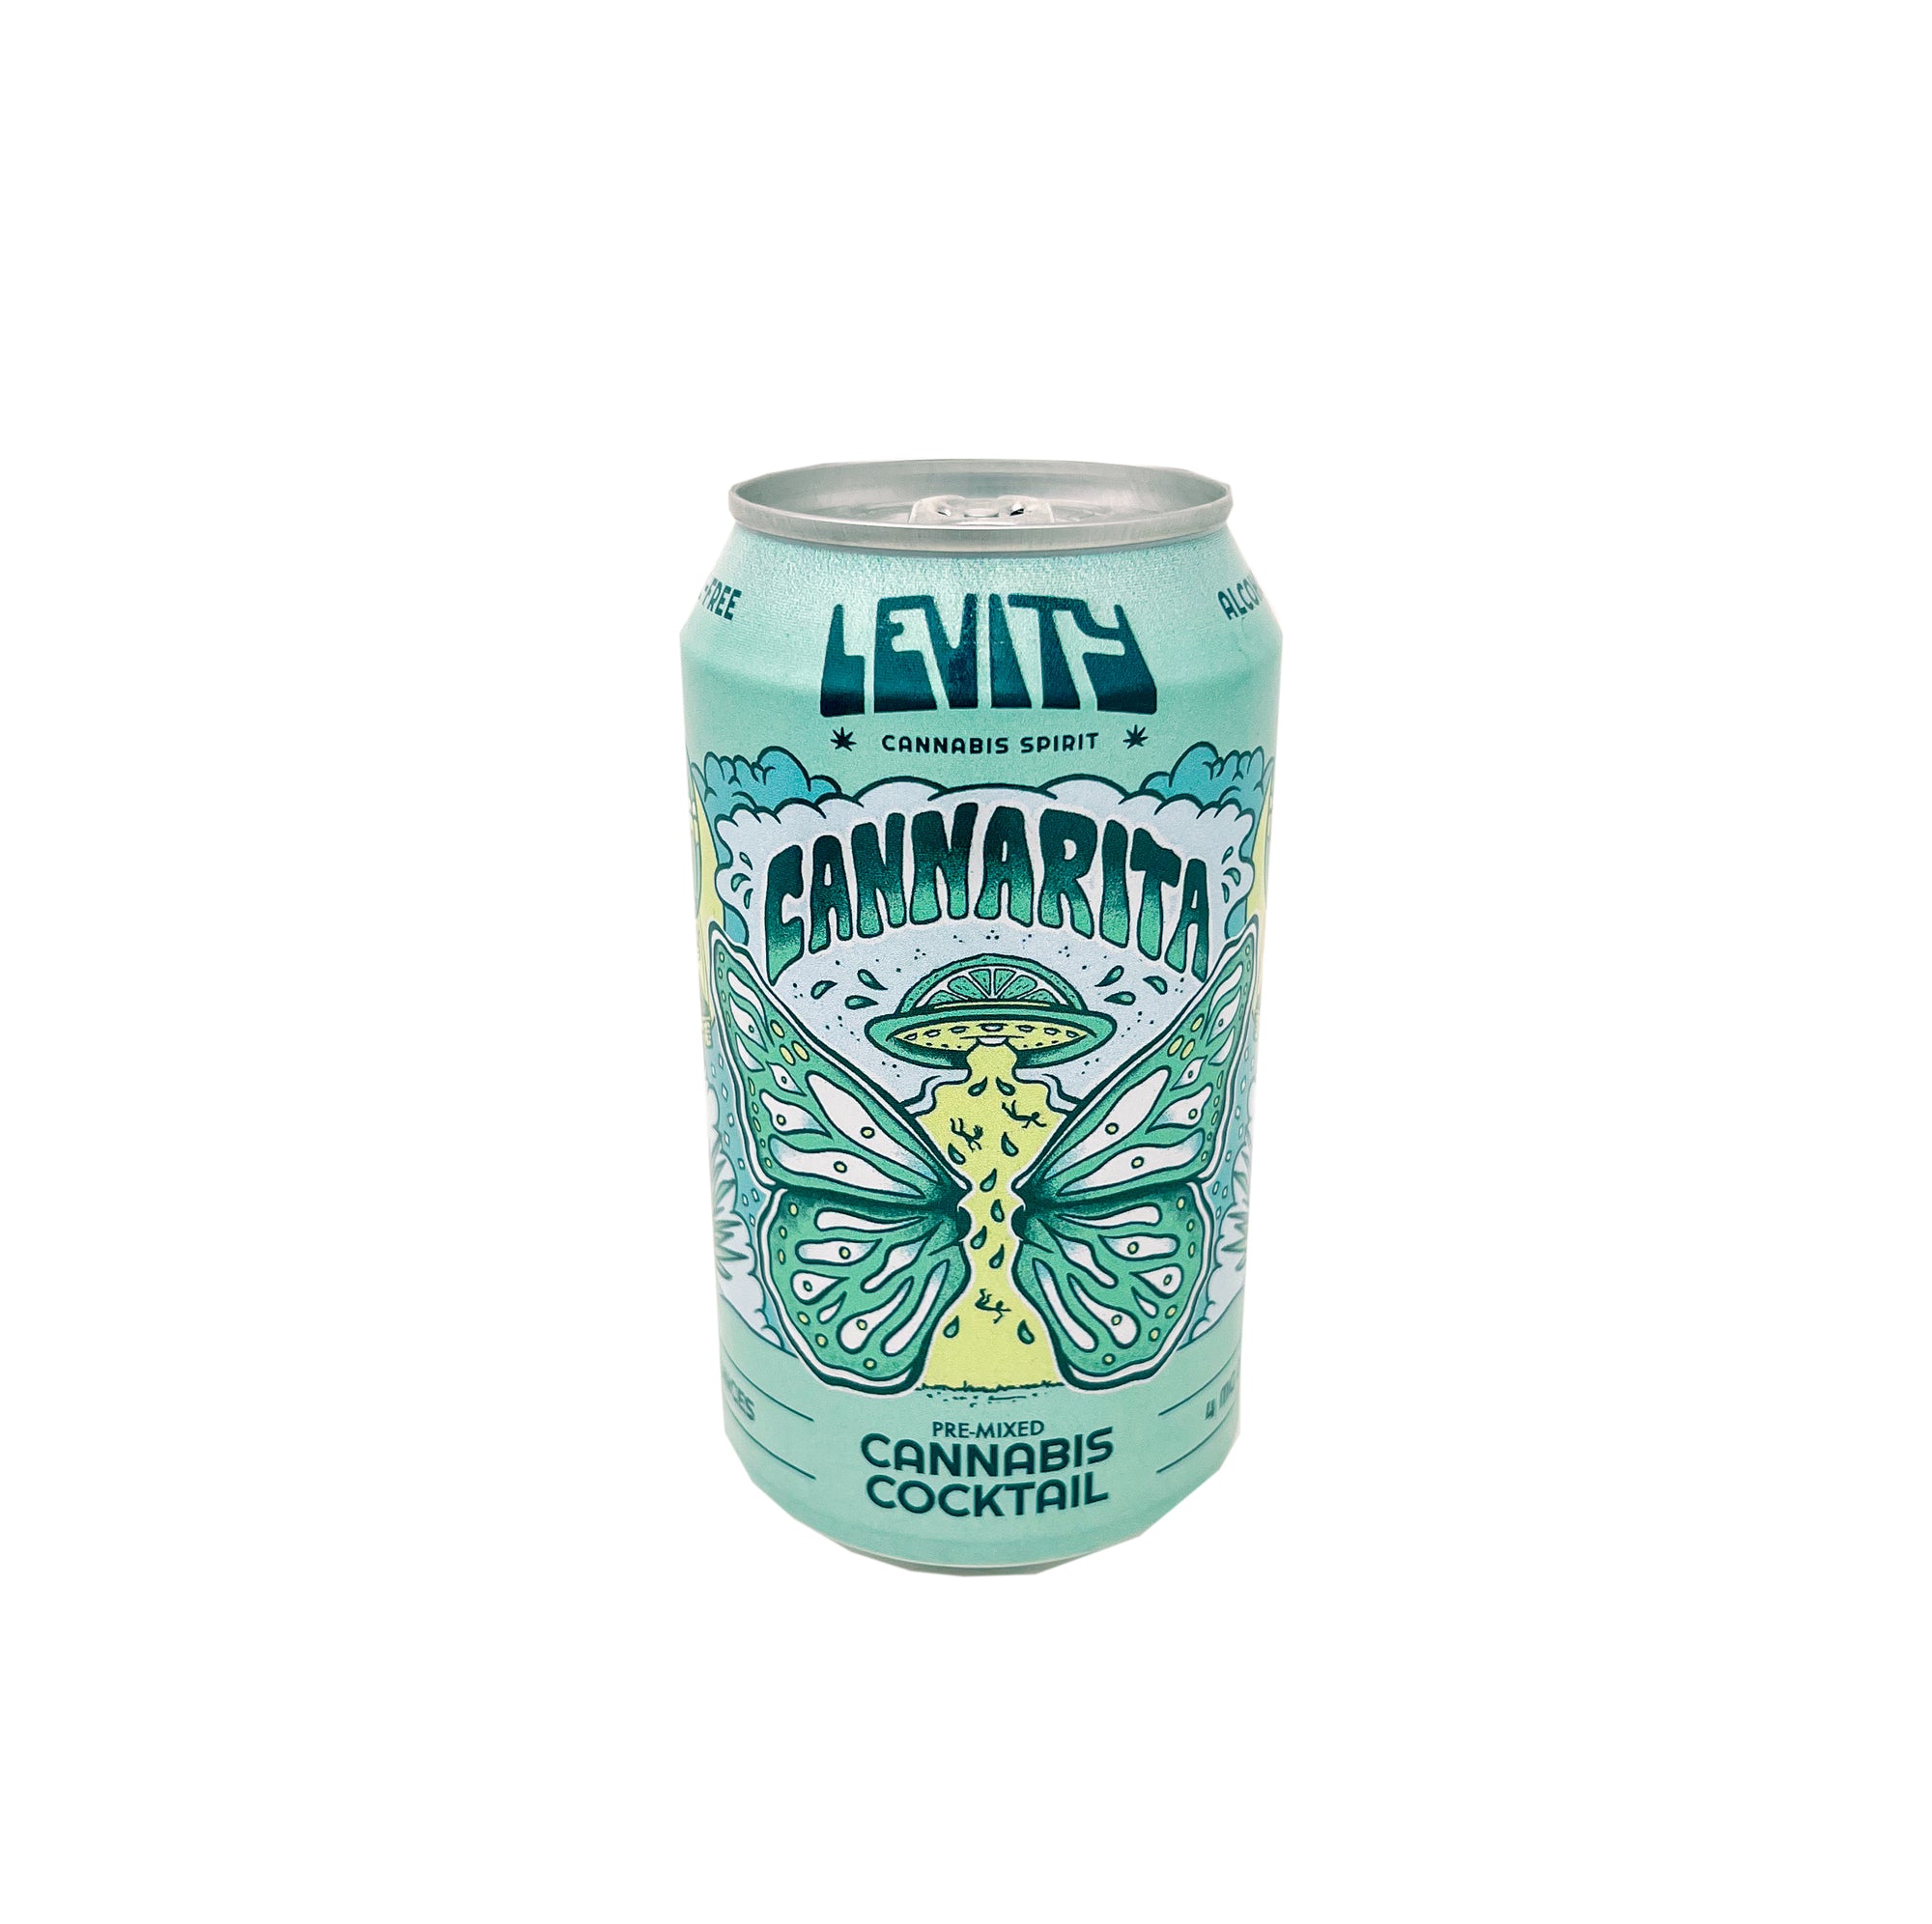 Levity Canned Cocktails - Cannarita